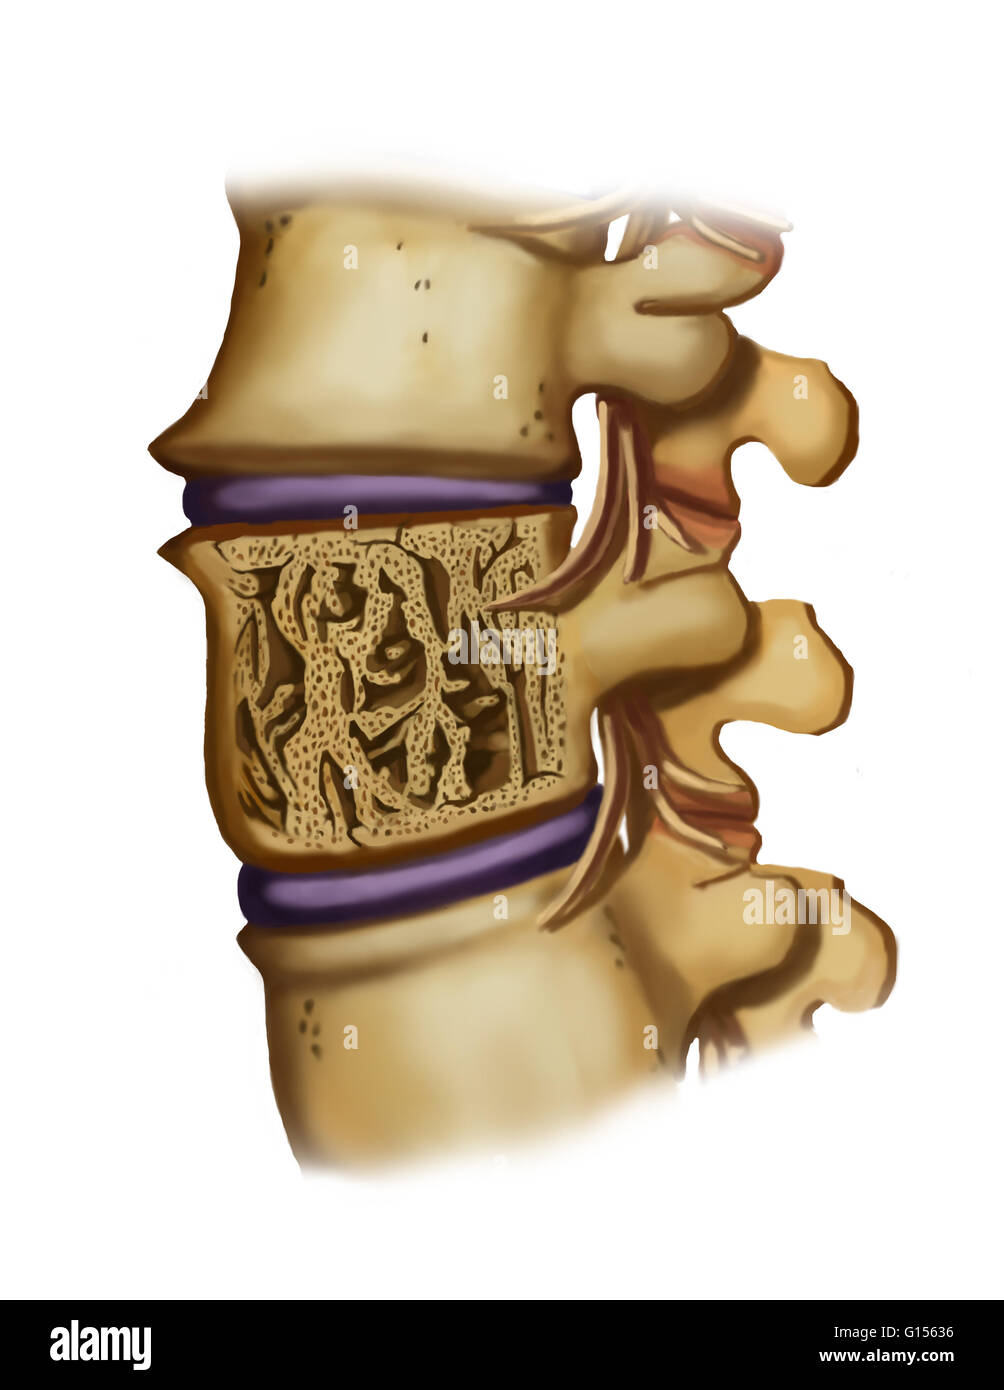 Artwork of a spine with fractured vertebrae due to osteoporosis. Osteoporosis is a lowering of bone density causing bones to become brittle and liable to fracture (as shown here). In this disease, spinal bones of the lower back more commonly fracture as t Stock Photo